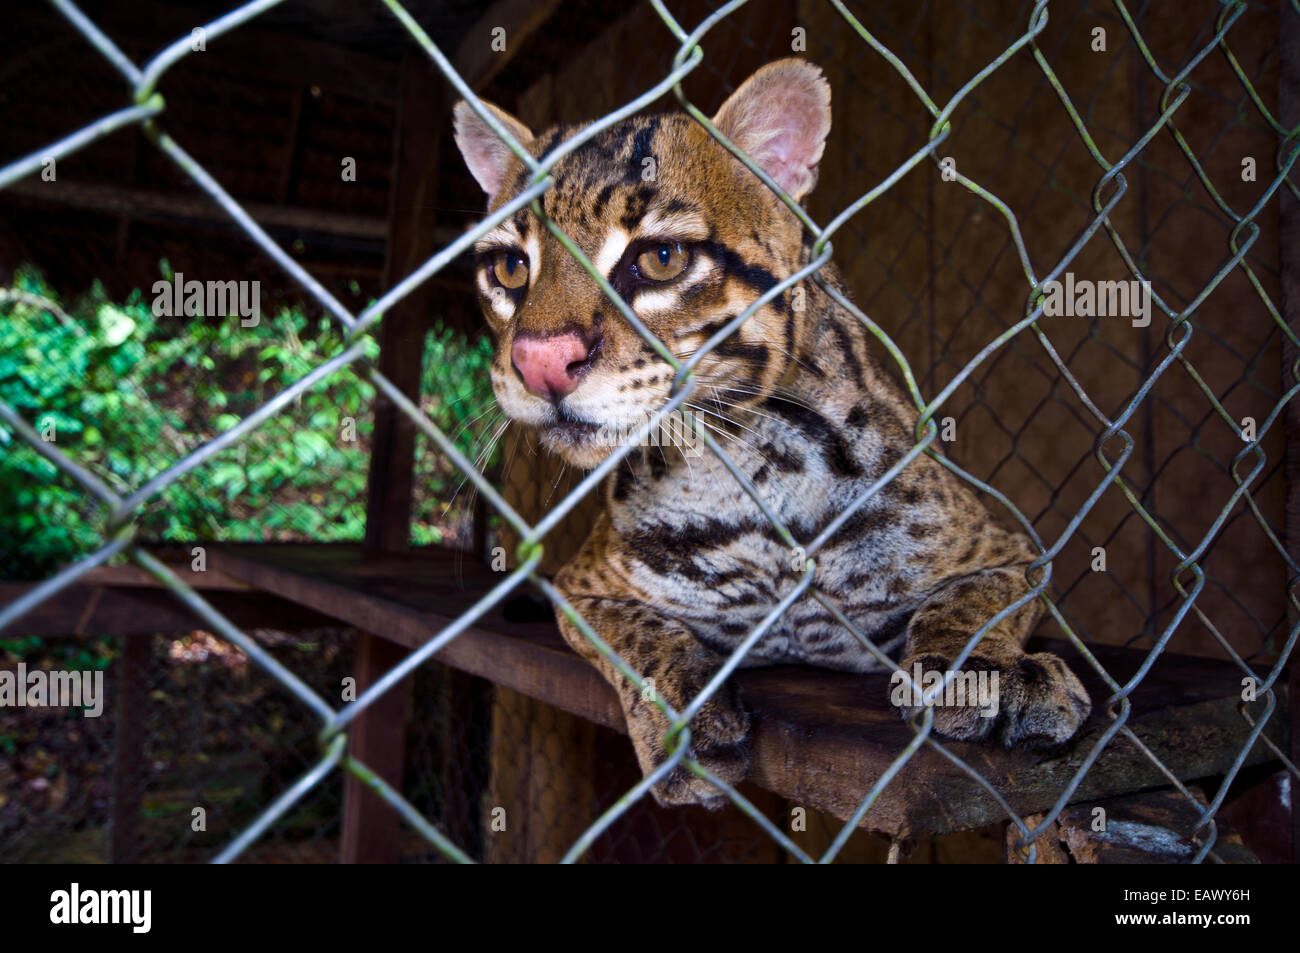 An ocelot confiscated from poachers rests in a cage at a zoo in the Amazon Rainforest. Stock Photo